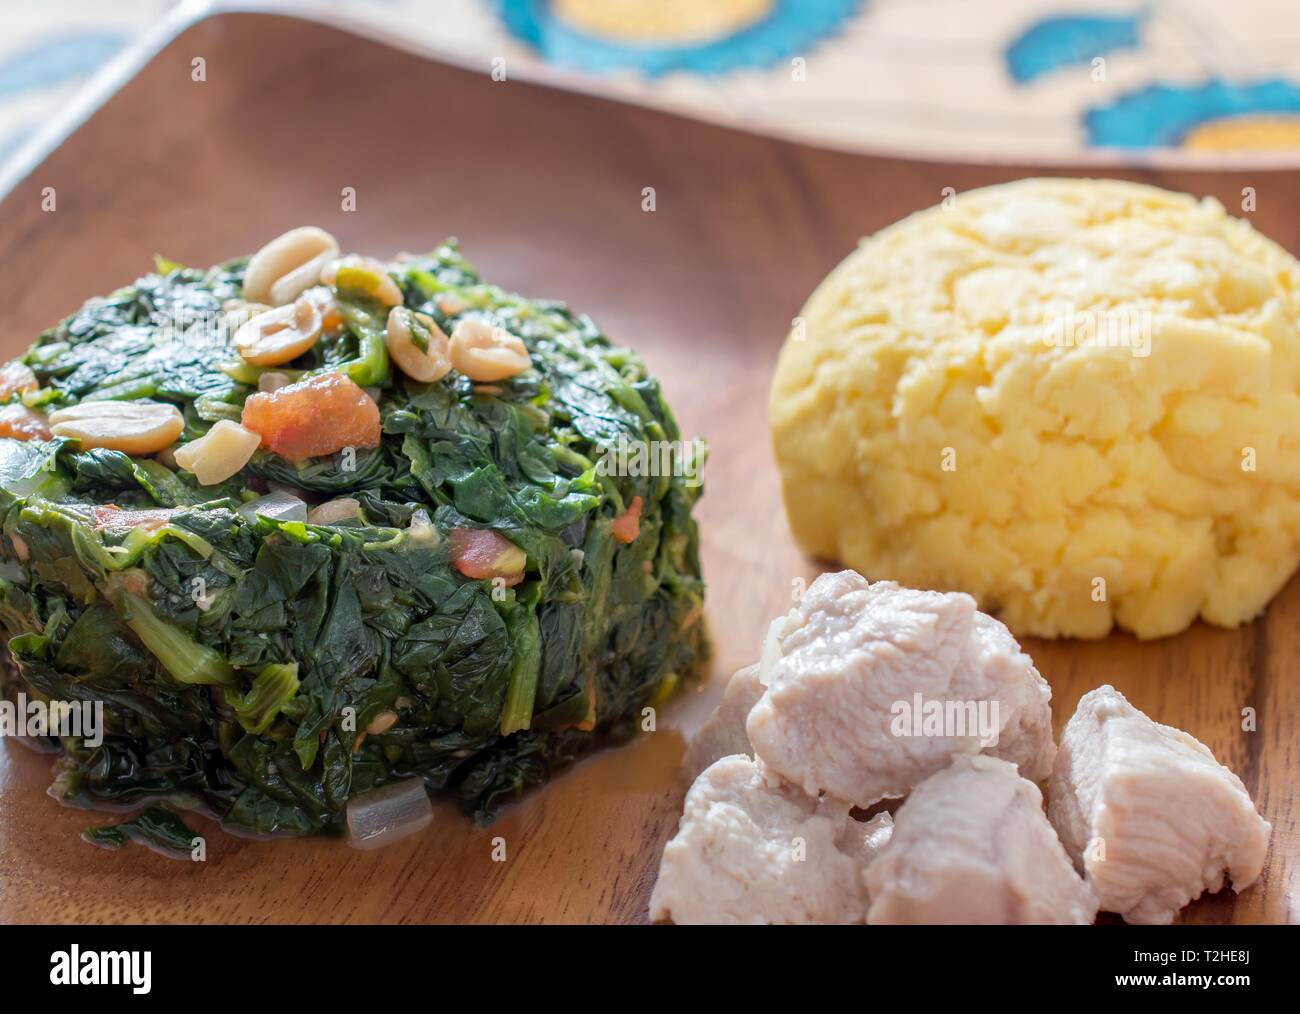 Nchima, polenta with peanut and vegetable sauce, African cuisine, Zambia Stock Photo